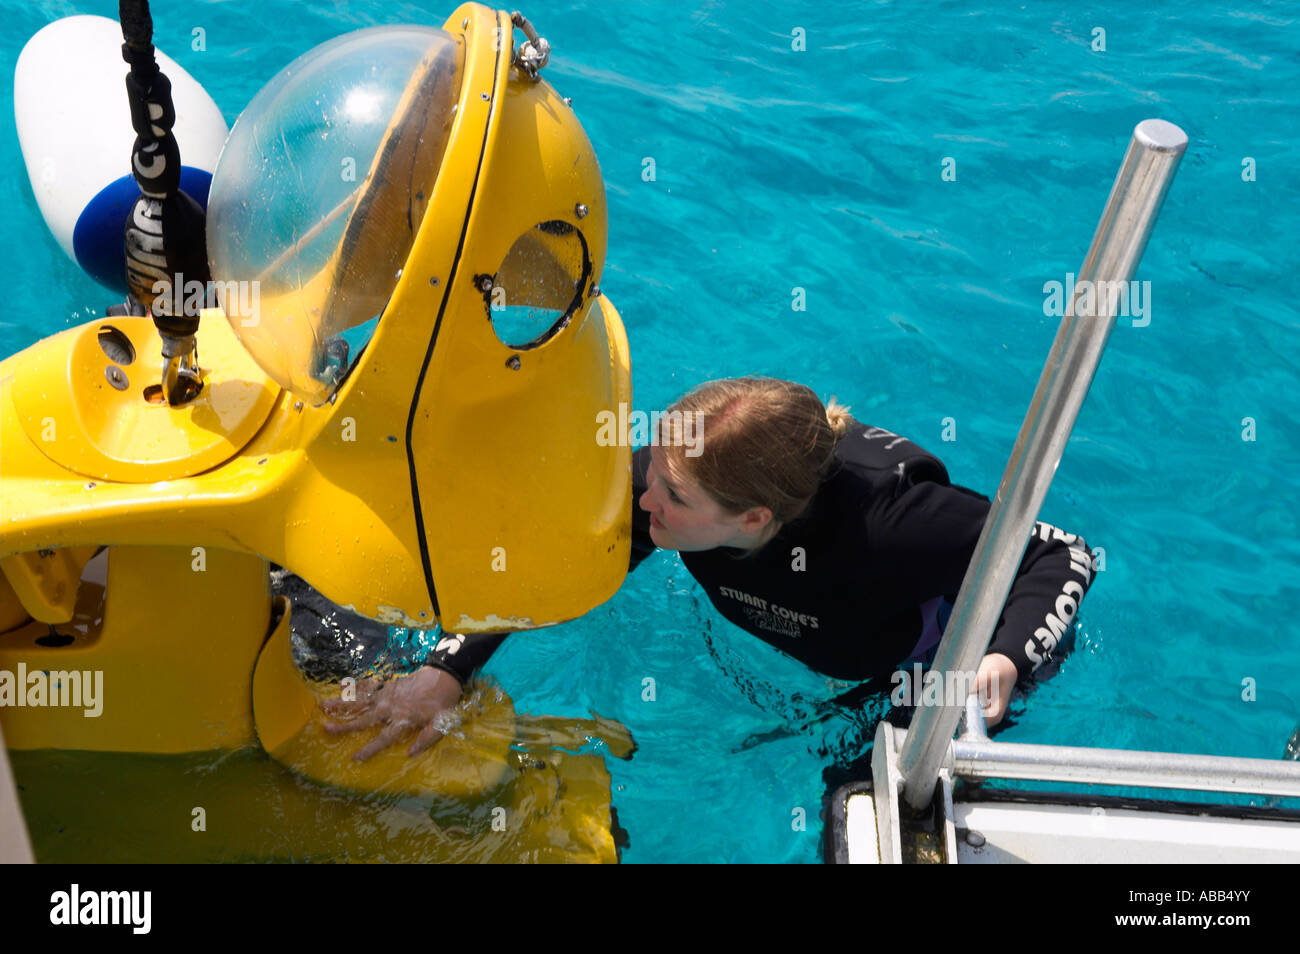 Woman diver entering Yellow Submarines before lowered from boat Stuart Cove s Dive Nassau Paradise Island Bahamas Stock Photo